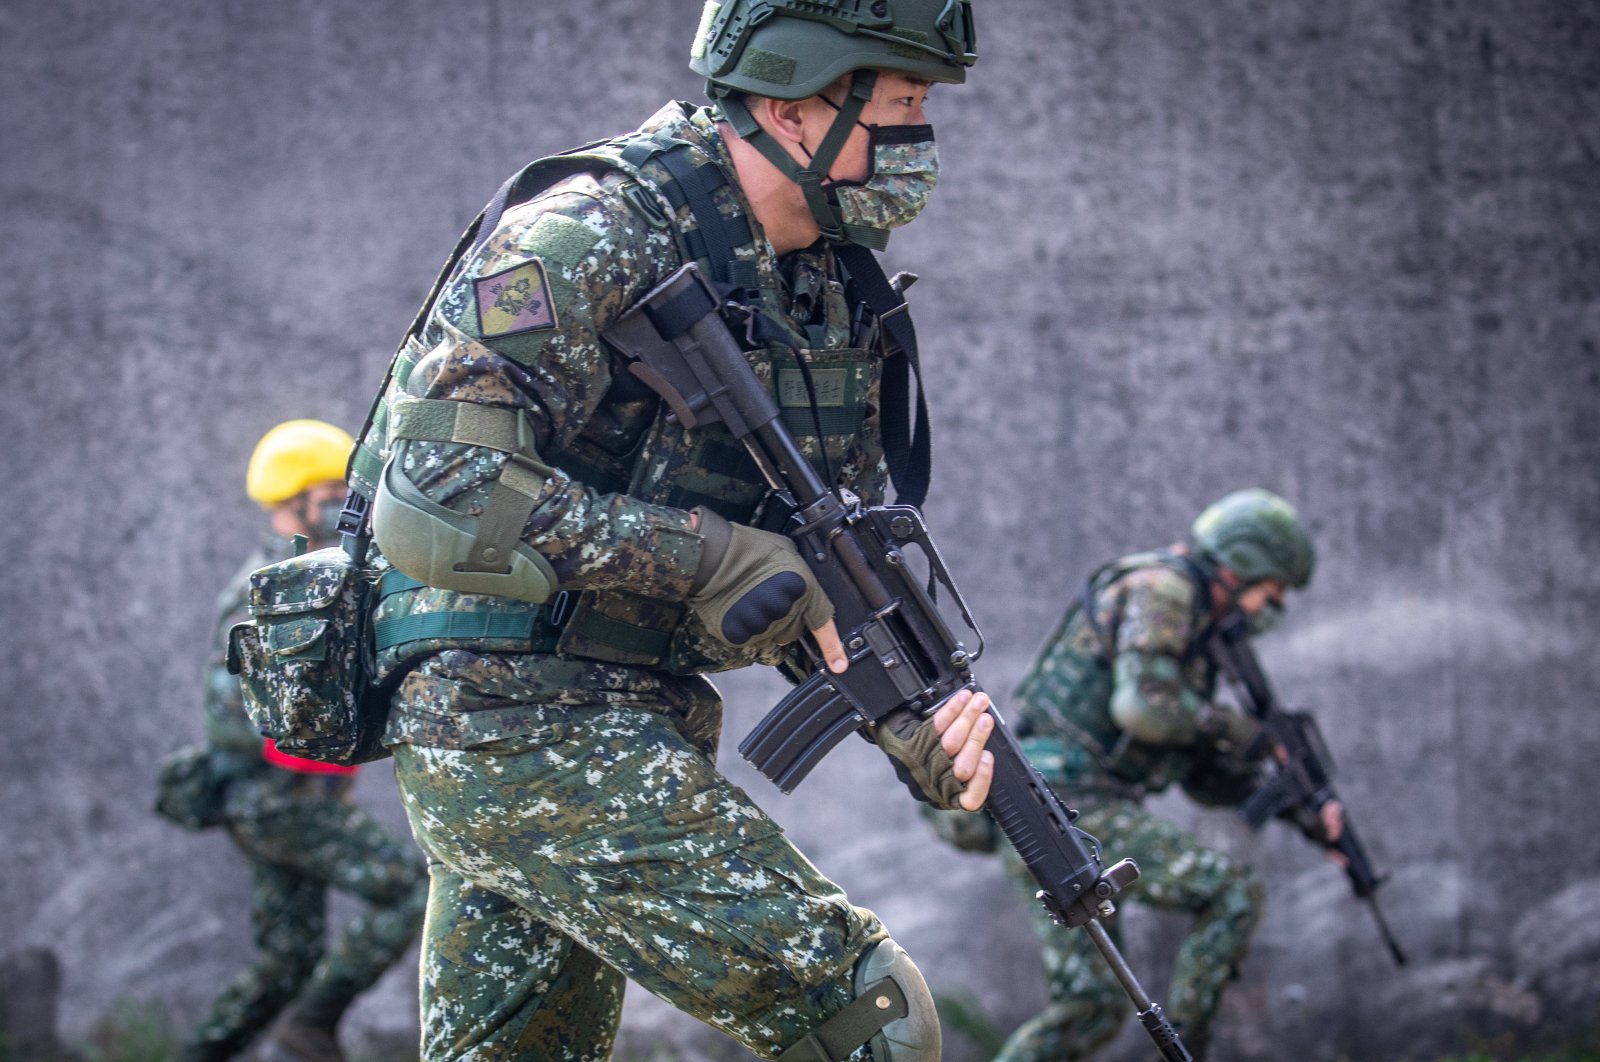 Taiwanese military personnel participates in a training exercise inside a military base in Taoyuan, Taiwan, Feb. 21, 2023. (EPA Photo)